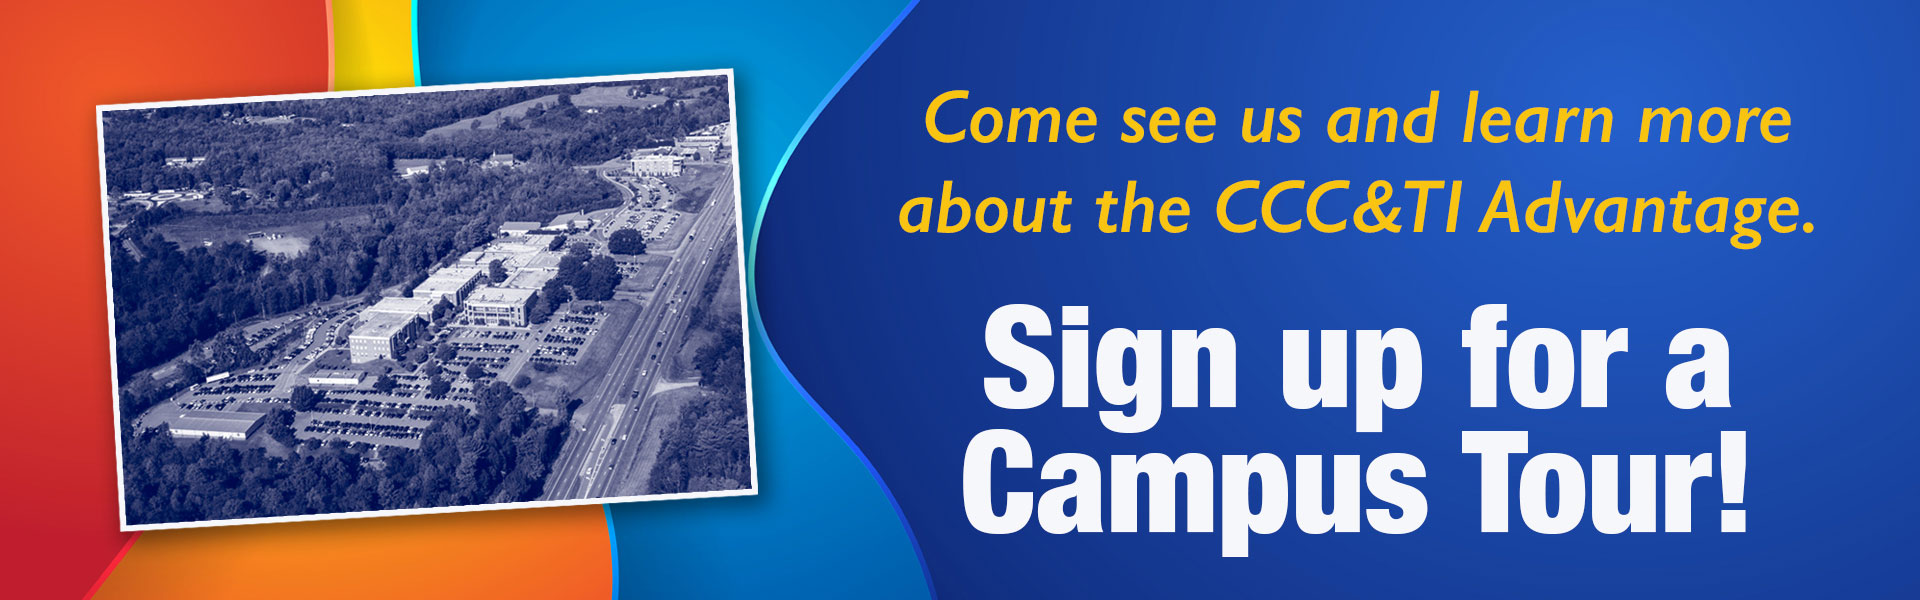 Sign up for a Campus Tour